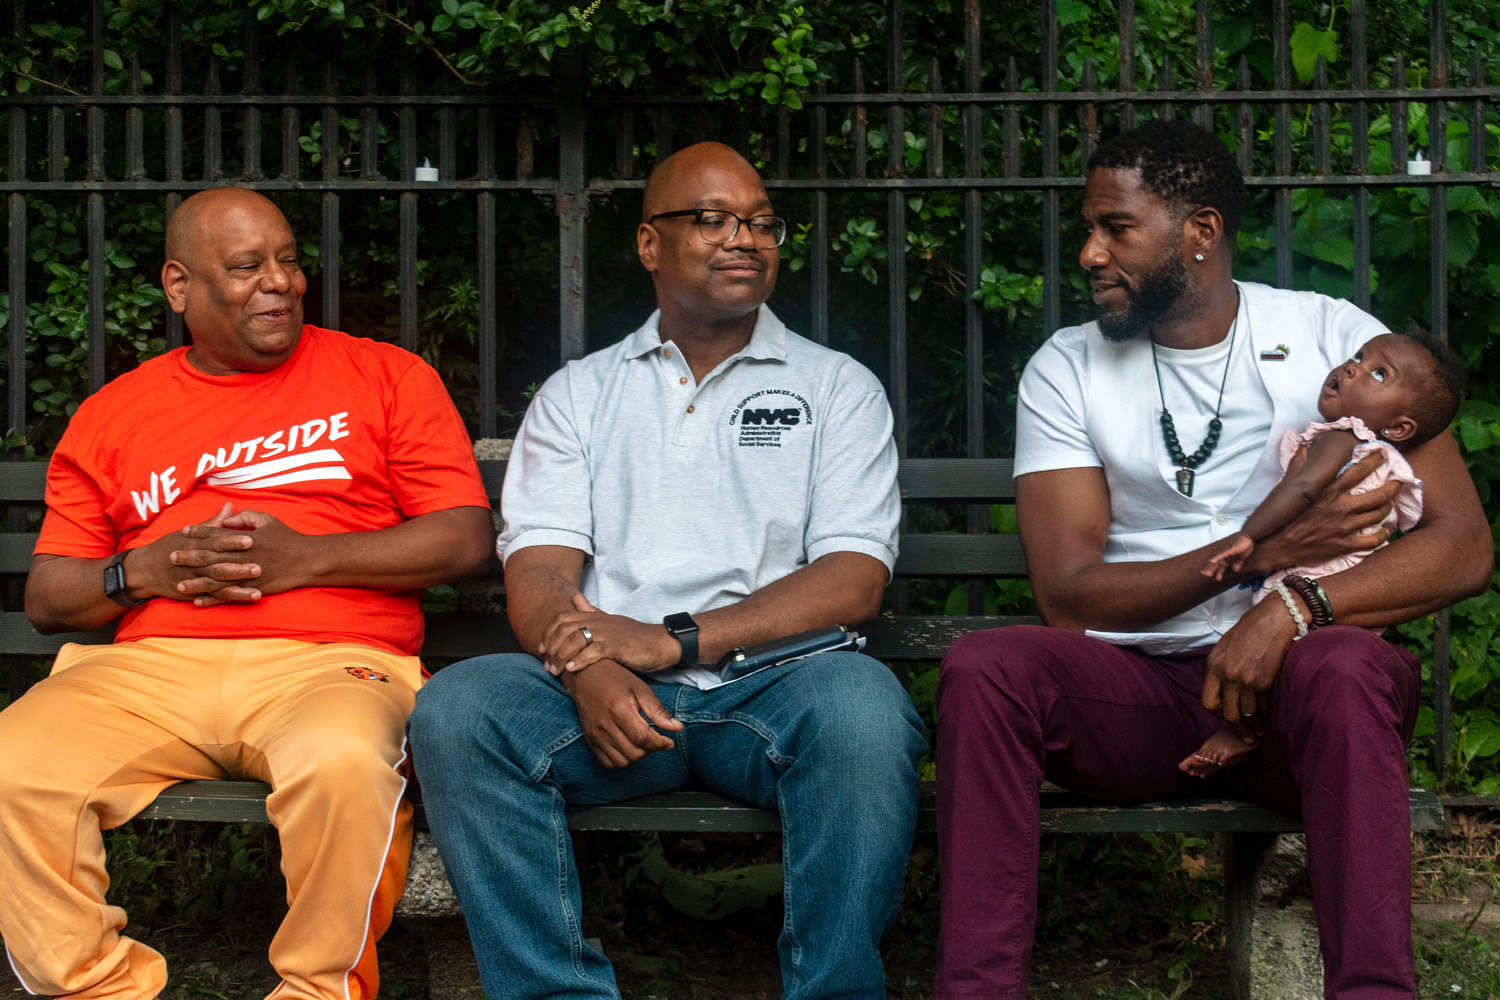 Social services commissioner Gary Jenkins, center, who oversees the city’s vast shelter system, shares a park bench with public advocate Jumaane Williams and his newborn baby, right, and 'homeless hero’ Shams DaBaron, left, New York City’s unofficial spokesperson for the ‘unhoused’ July 30.